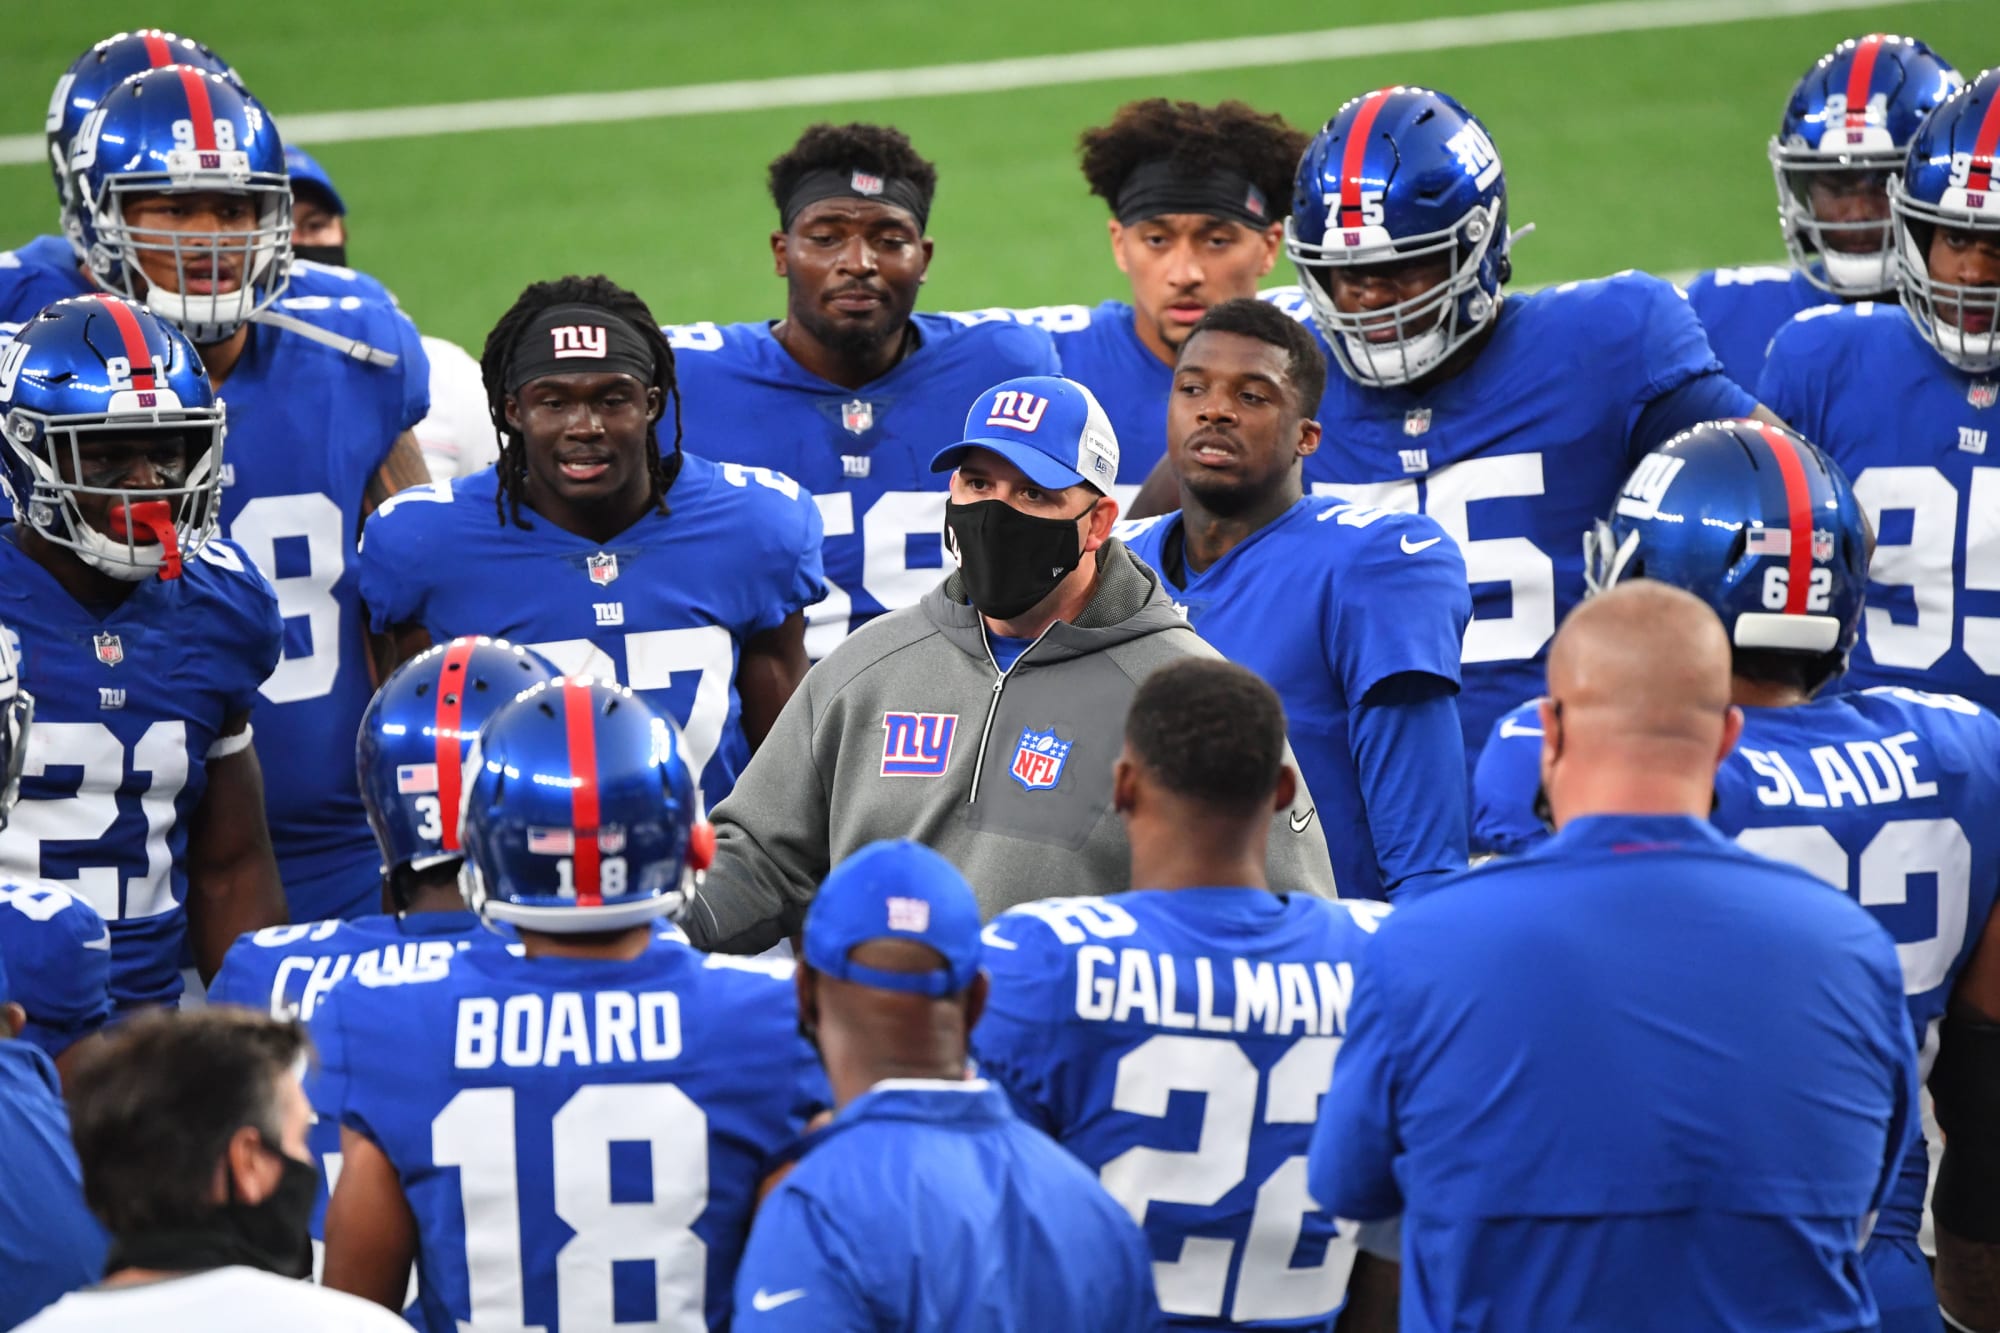 Will NY Giants win the NFC East? Predicting each remaining division game